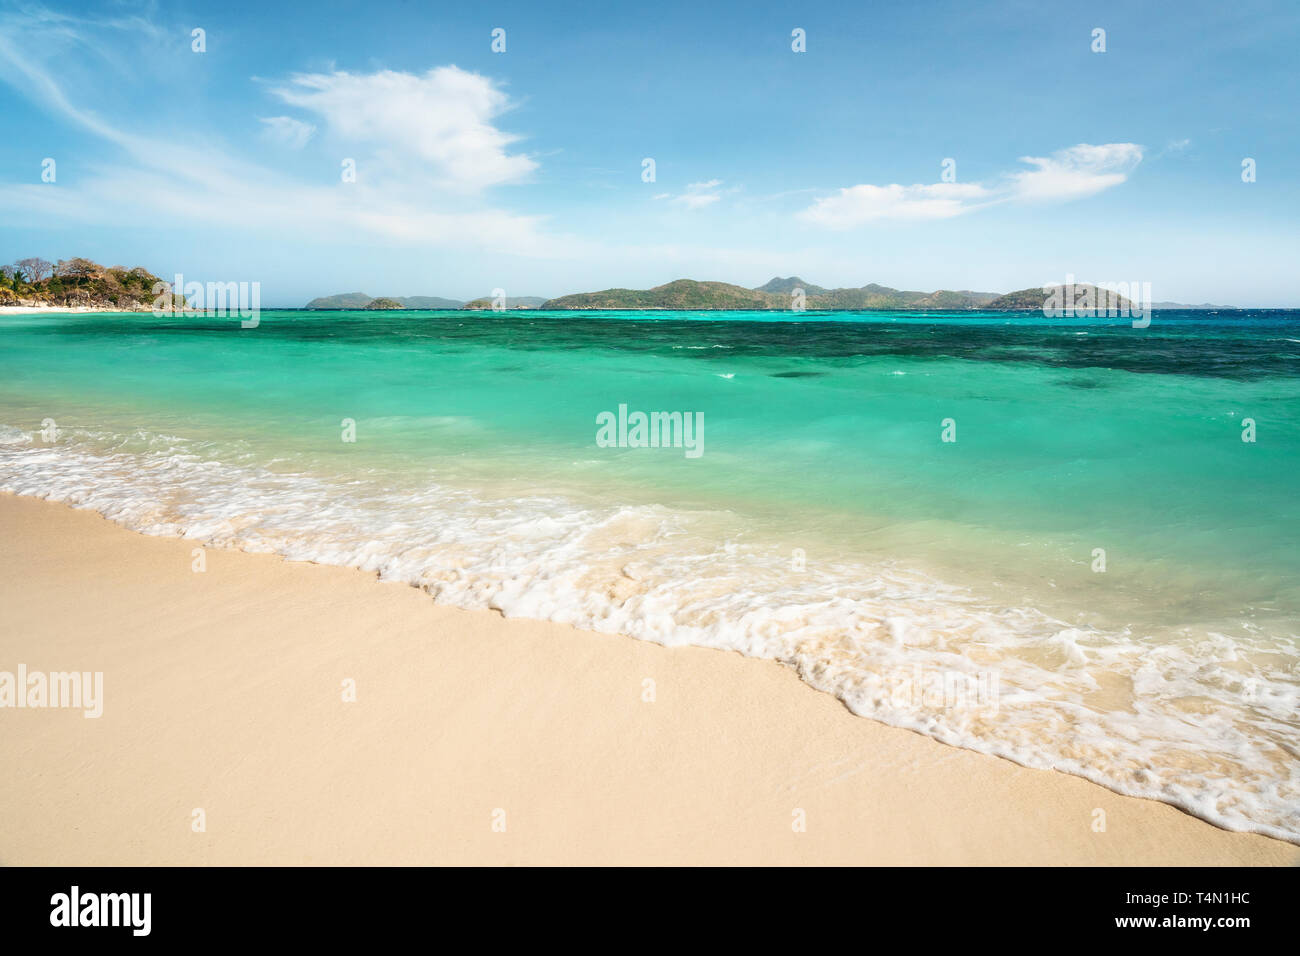 Tropical Malcapuya island with sea foam, azure water and white sand beach. Travel vacation at Philippines. Stock Photo